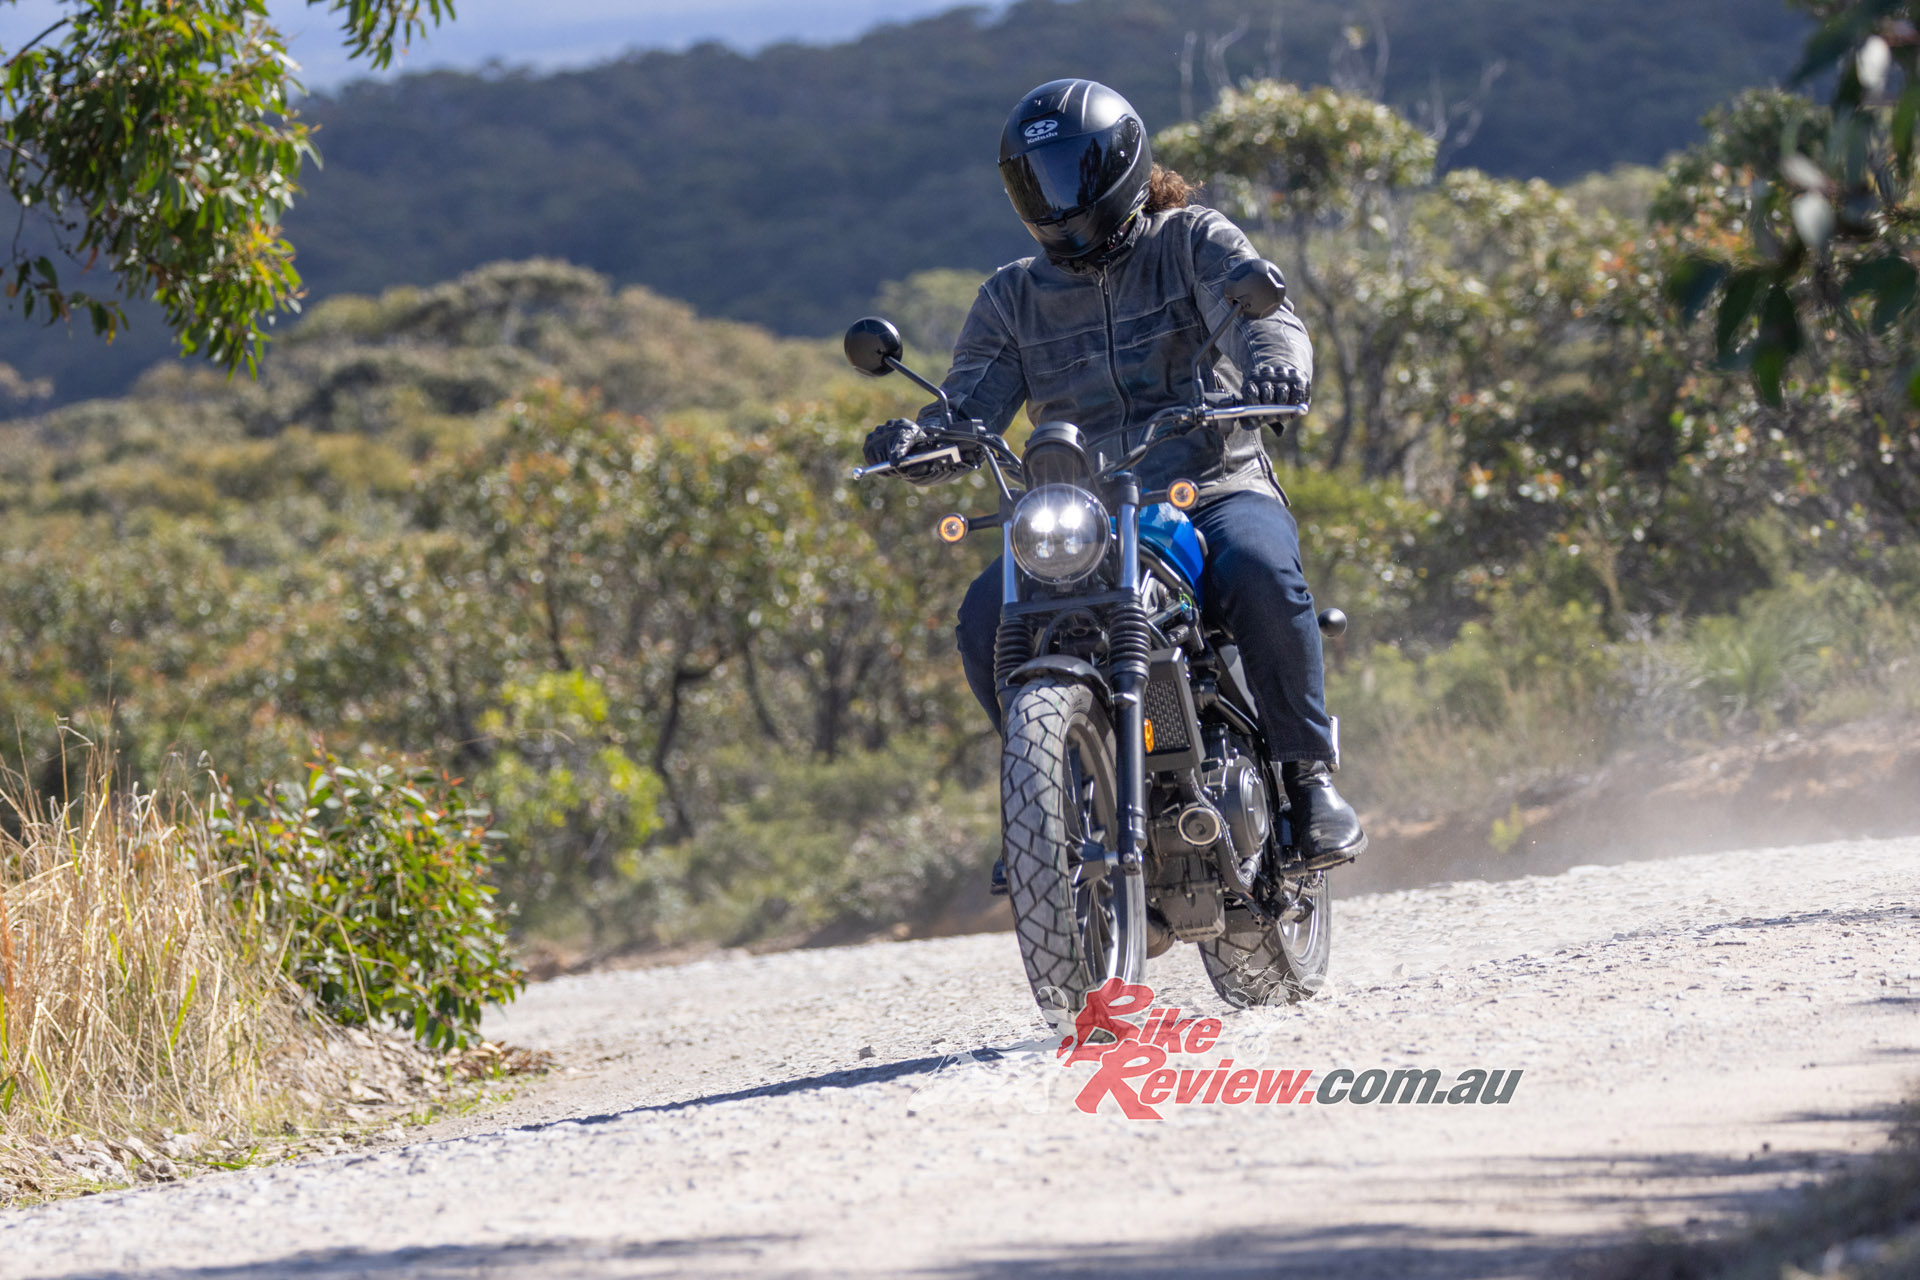 Nick did take the CL500 Scrambler on some loose surfaces, you wouldn't hit anything too challenging on this thing...